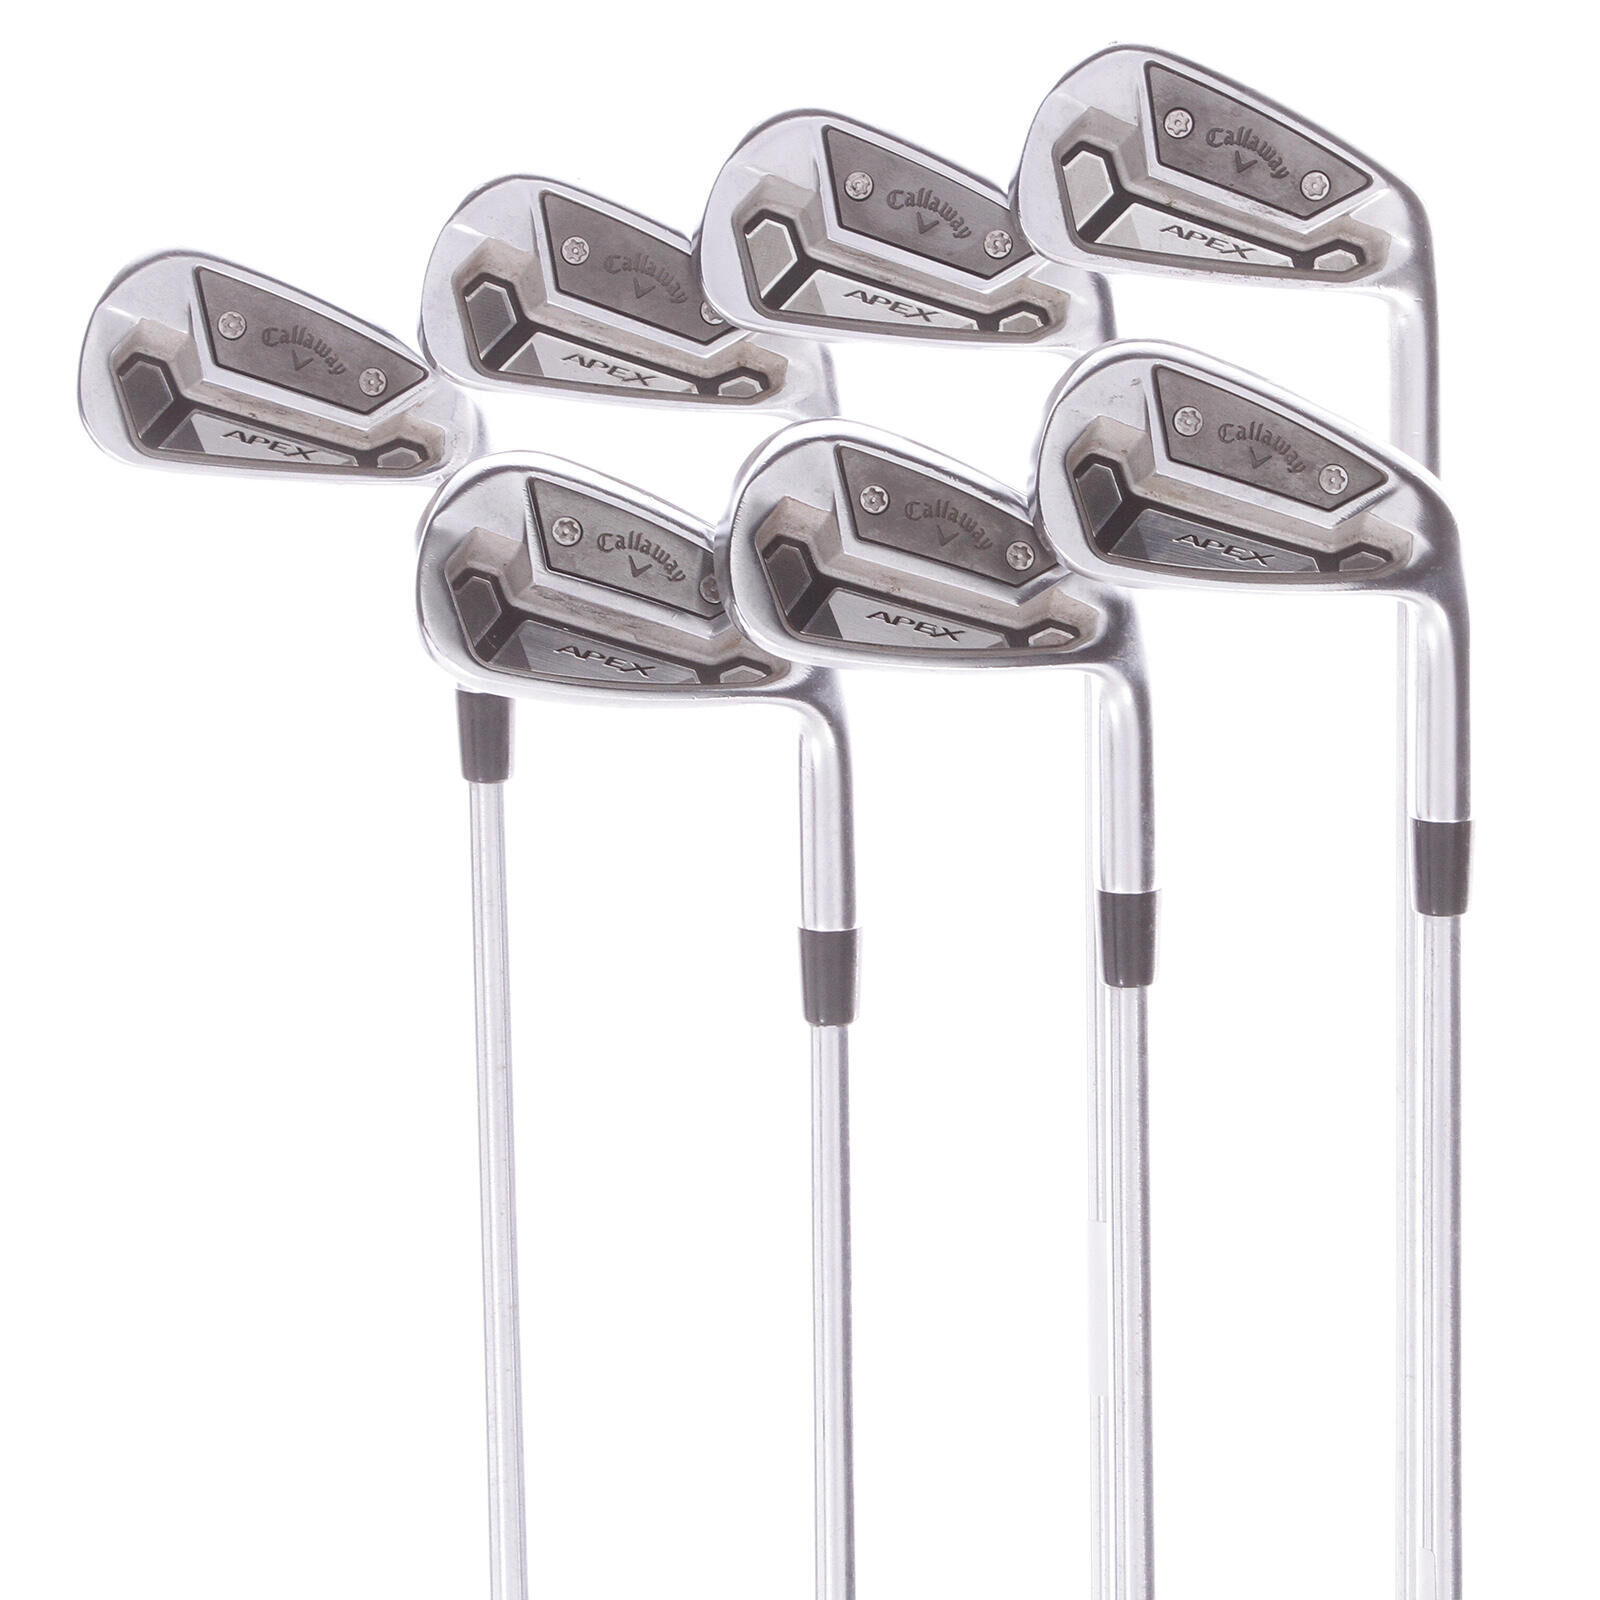 CALLAWAY USED - Iron Set 4-PW Callaway Apex 2021 TCB Forged Steel Right Handed - GRADE B